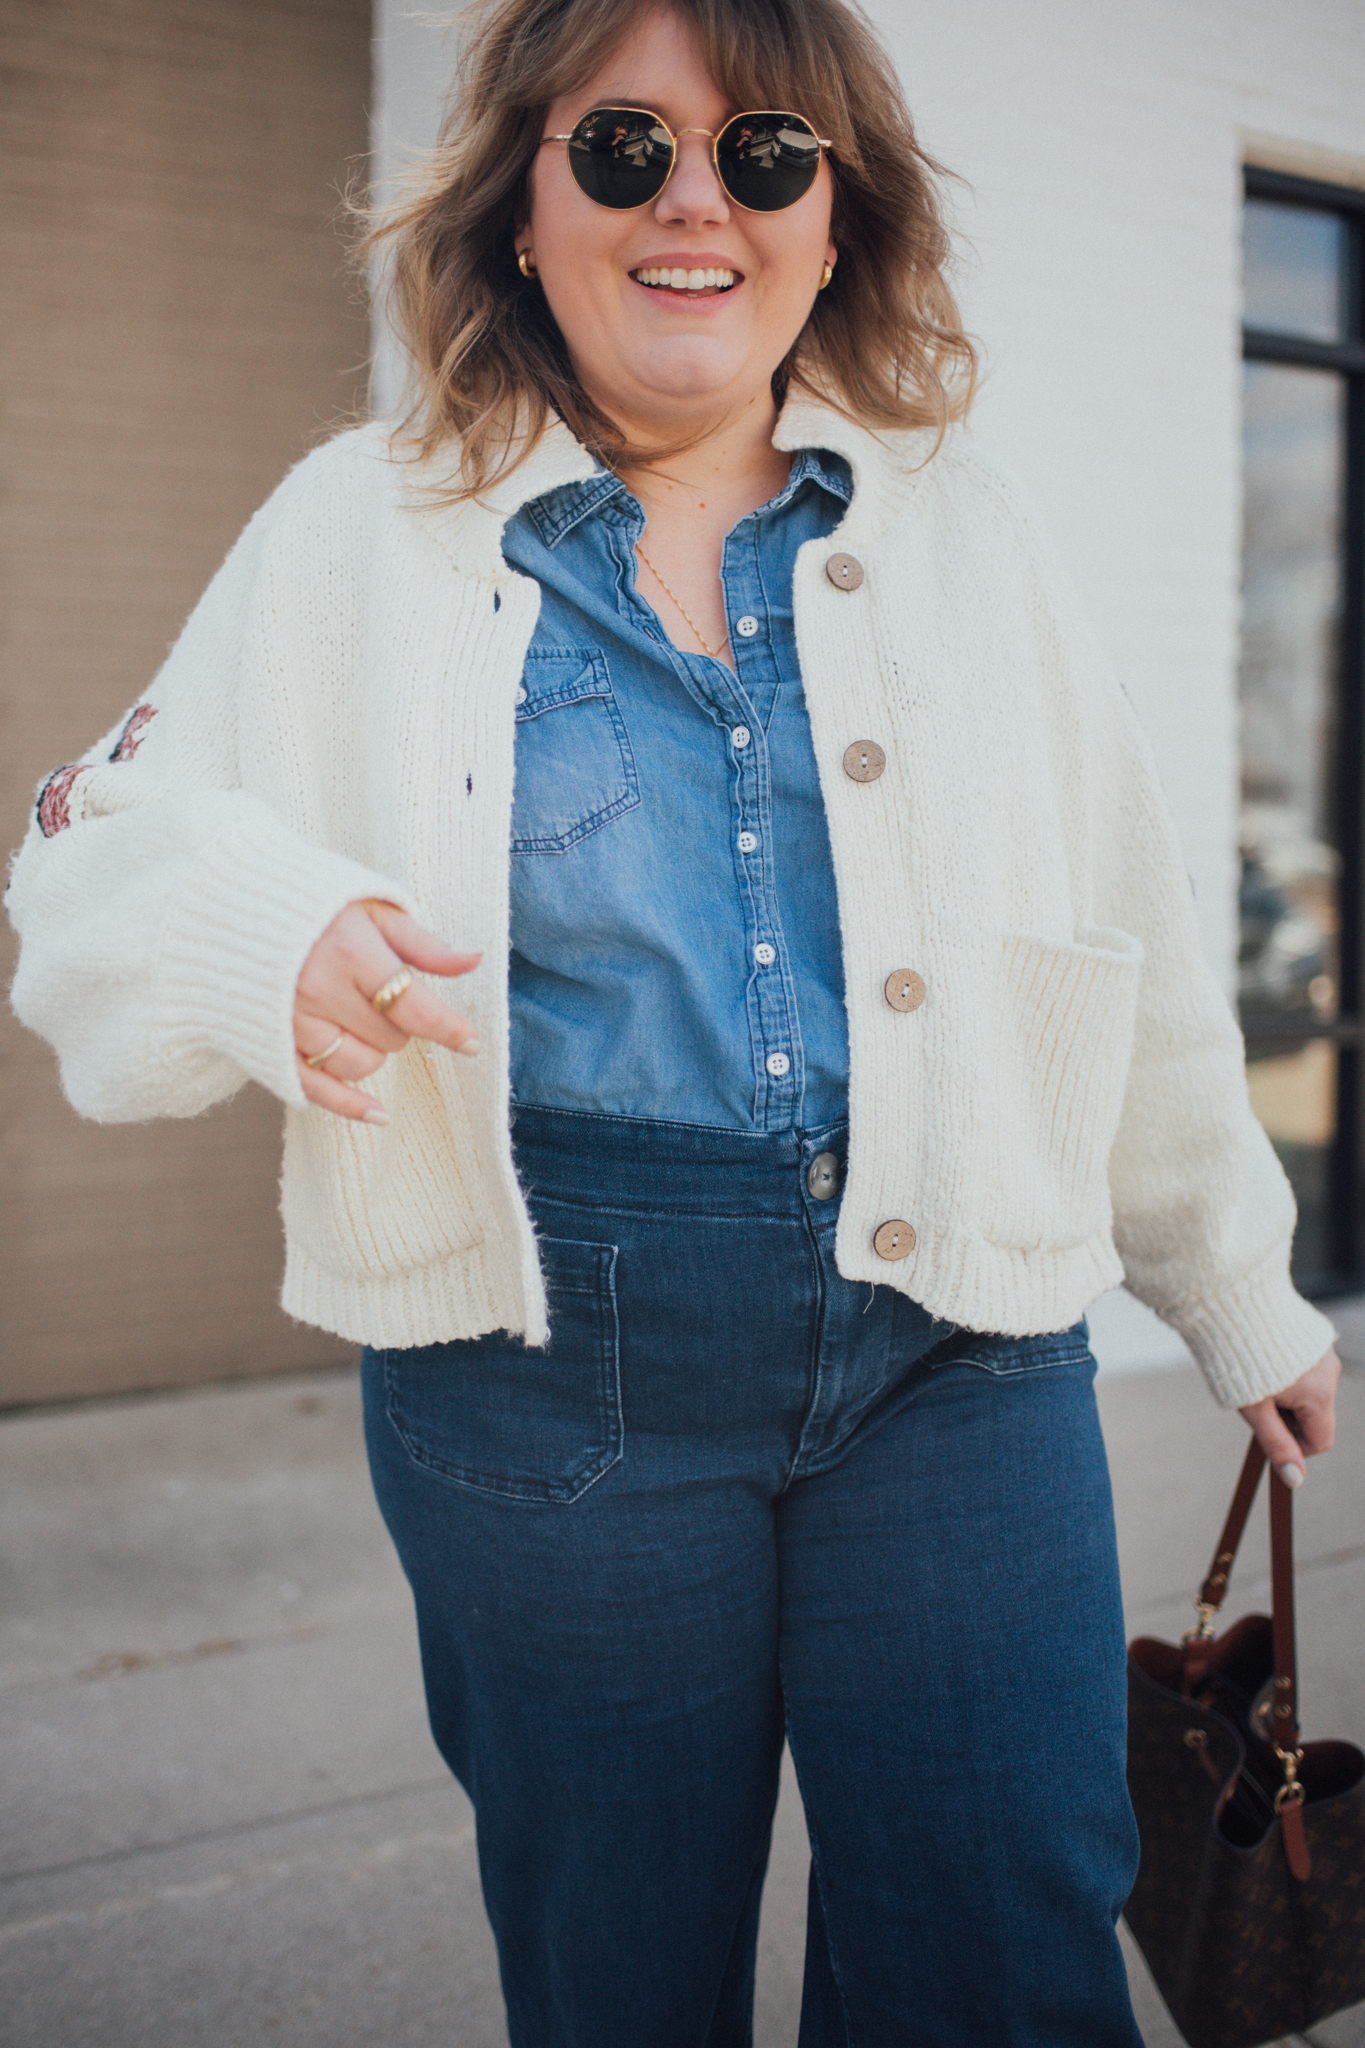 Sharing a plus size equestrian sweater look that is warm and fun for spring! I love the way this outfit wears and the boho vibe! 